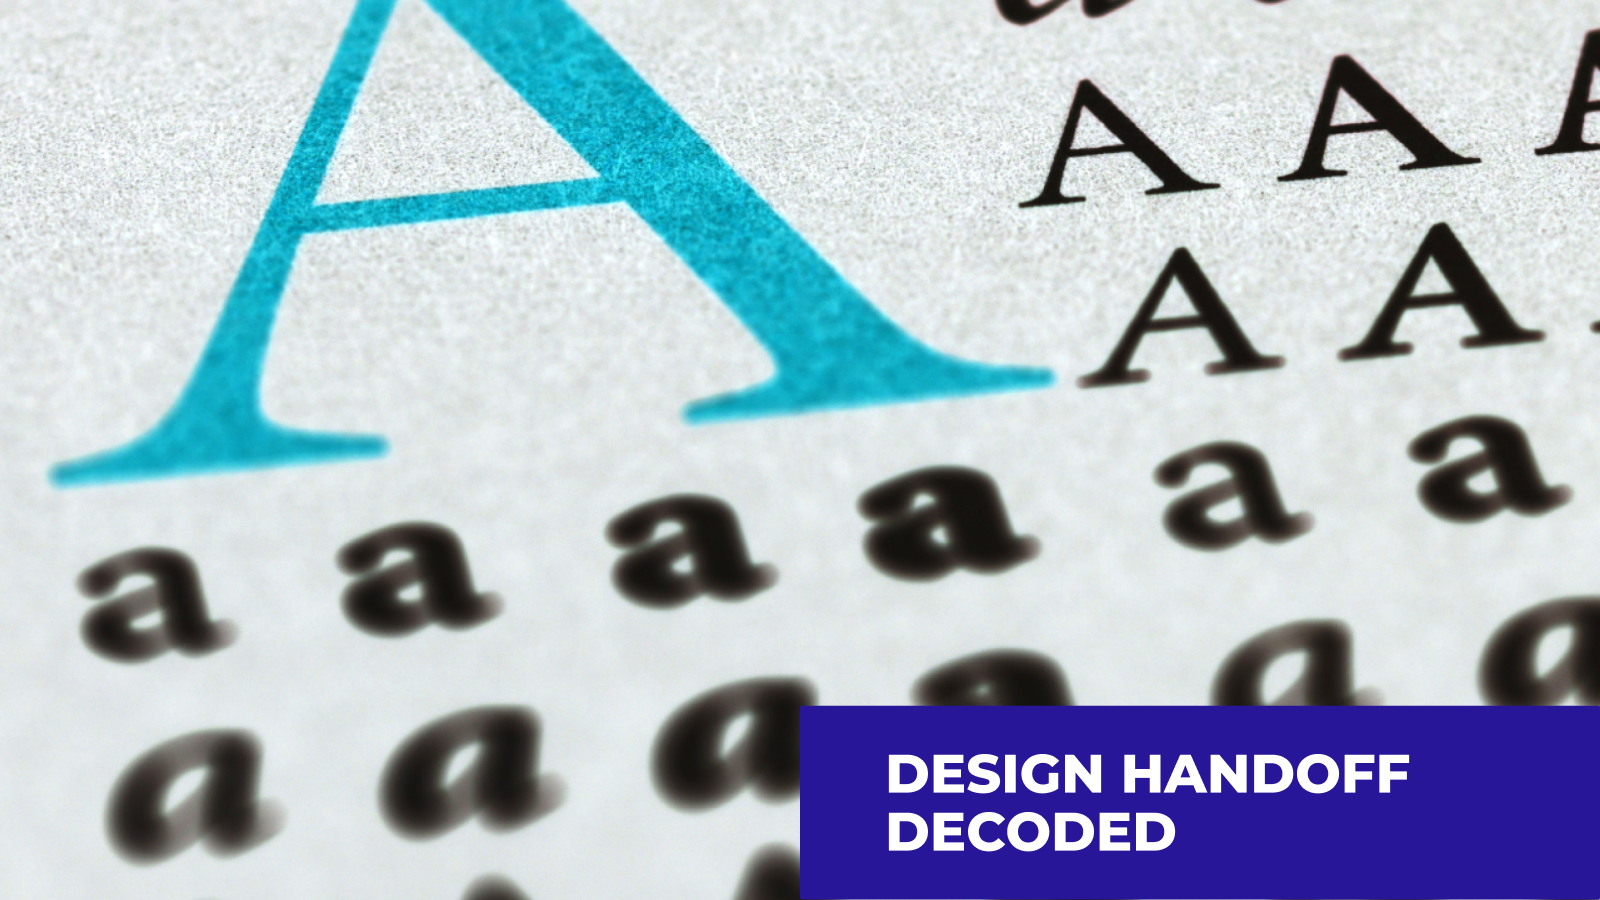 Close-up of the letter "A" on a piece of paper. The smaller letters "A" are visible in the background. At the bottom of the image are the words "DESIGN HANDOFF" and "DECODED".